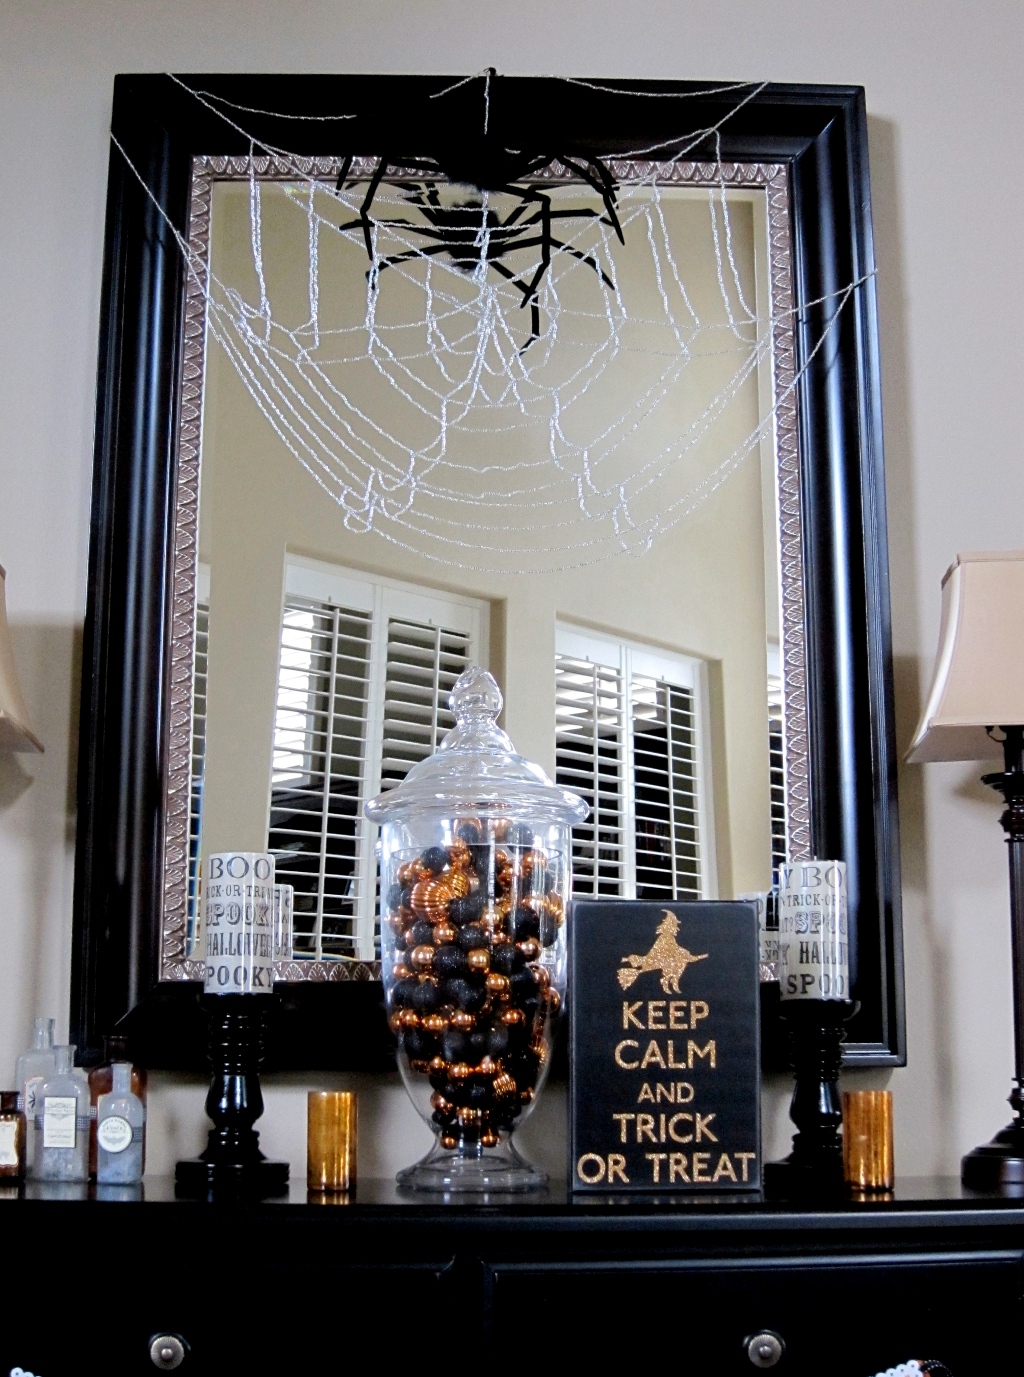 Spider Decor on Mirror in living room